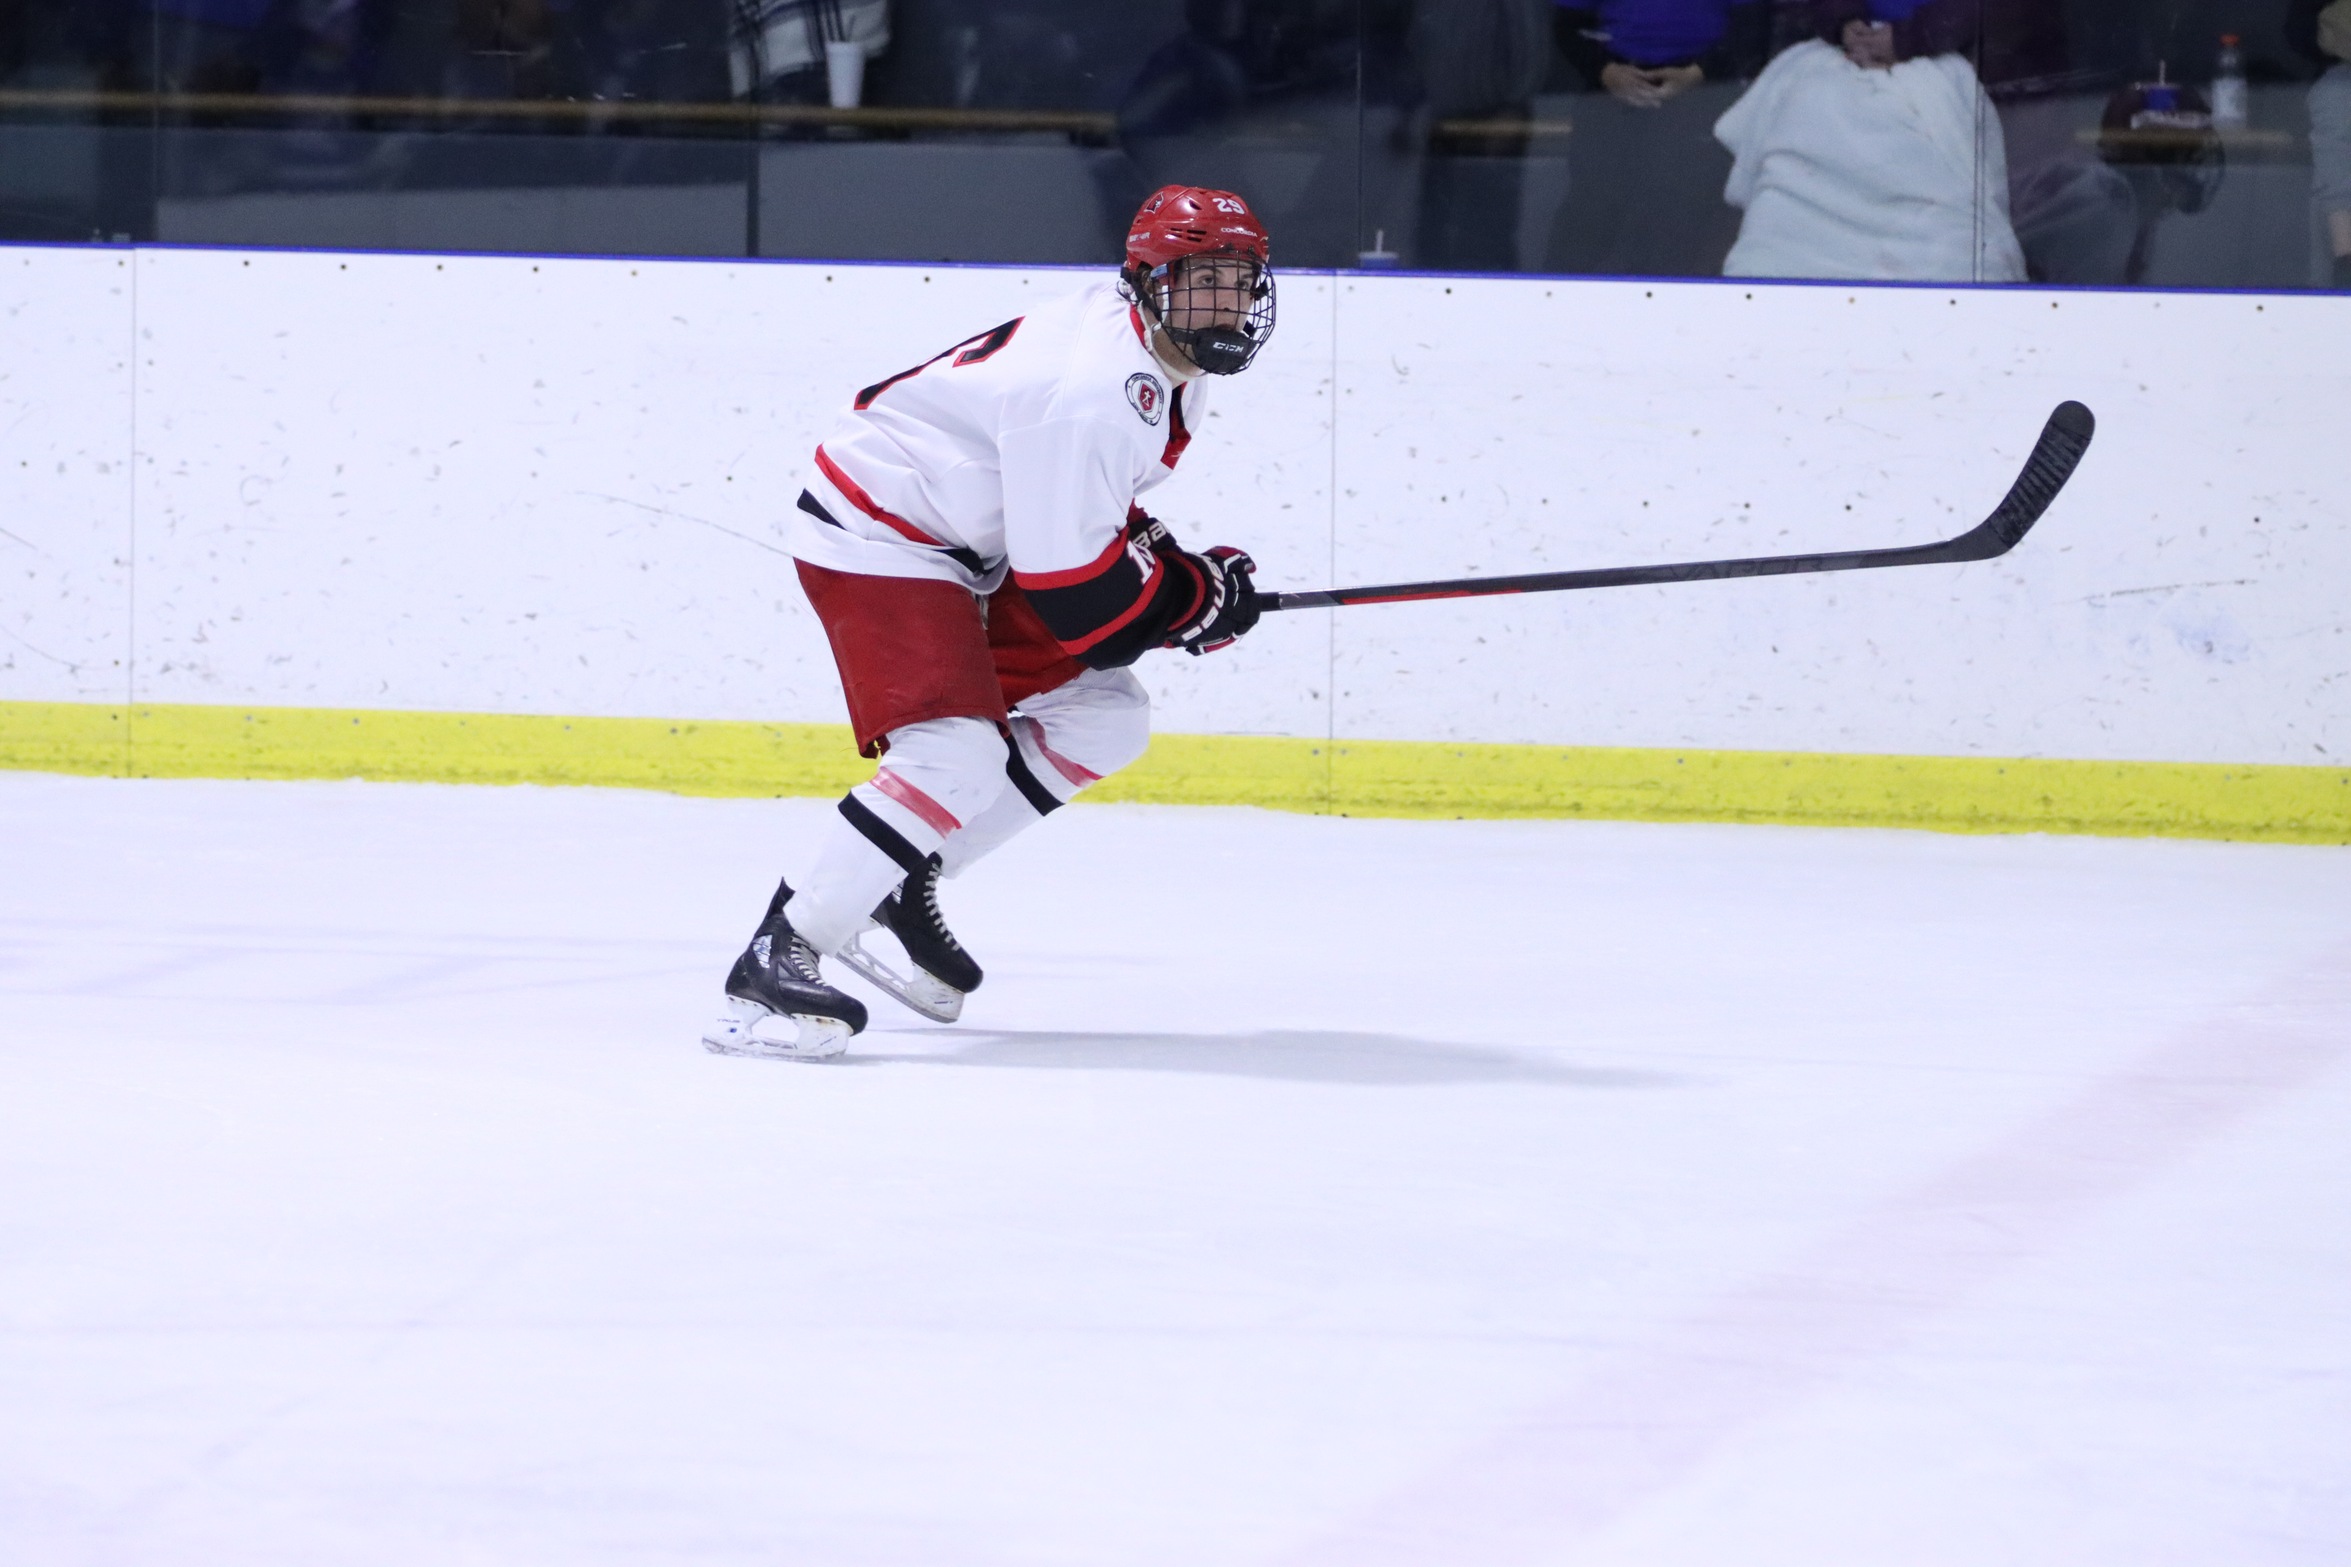 Men's Hockey drops close contest with #7 Warriors